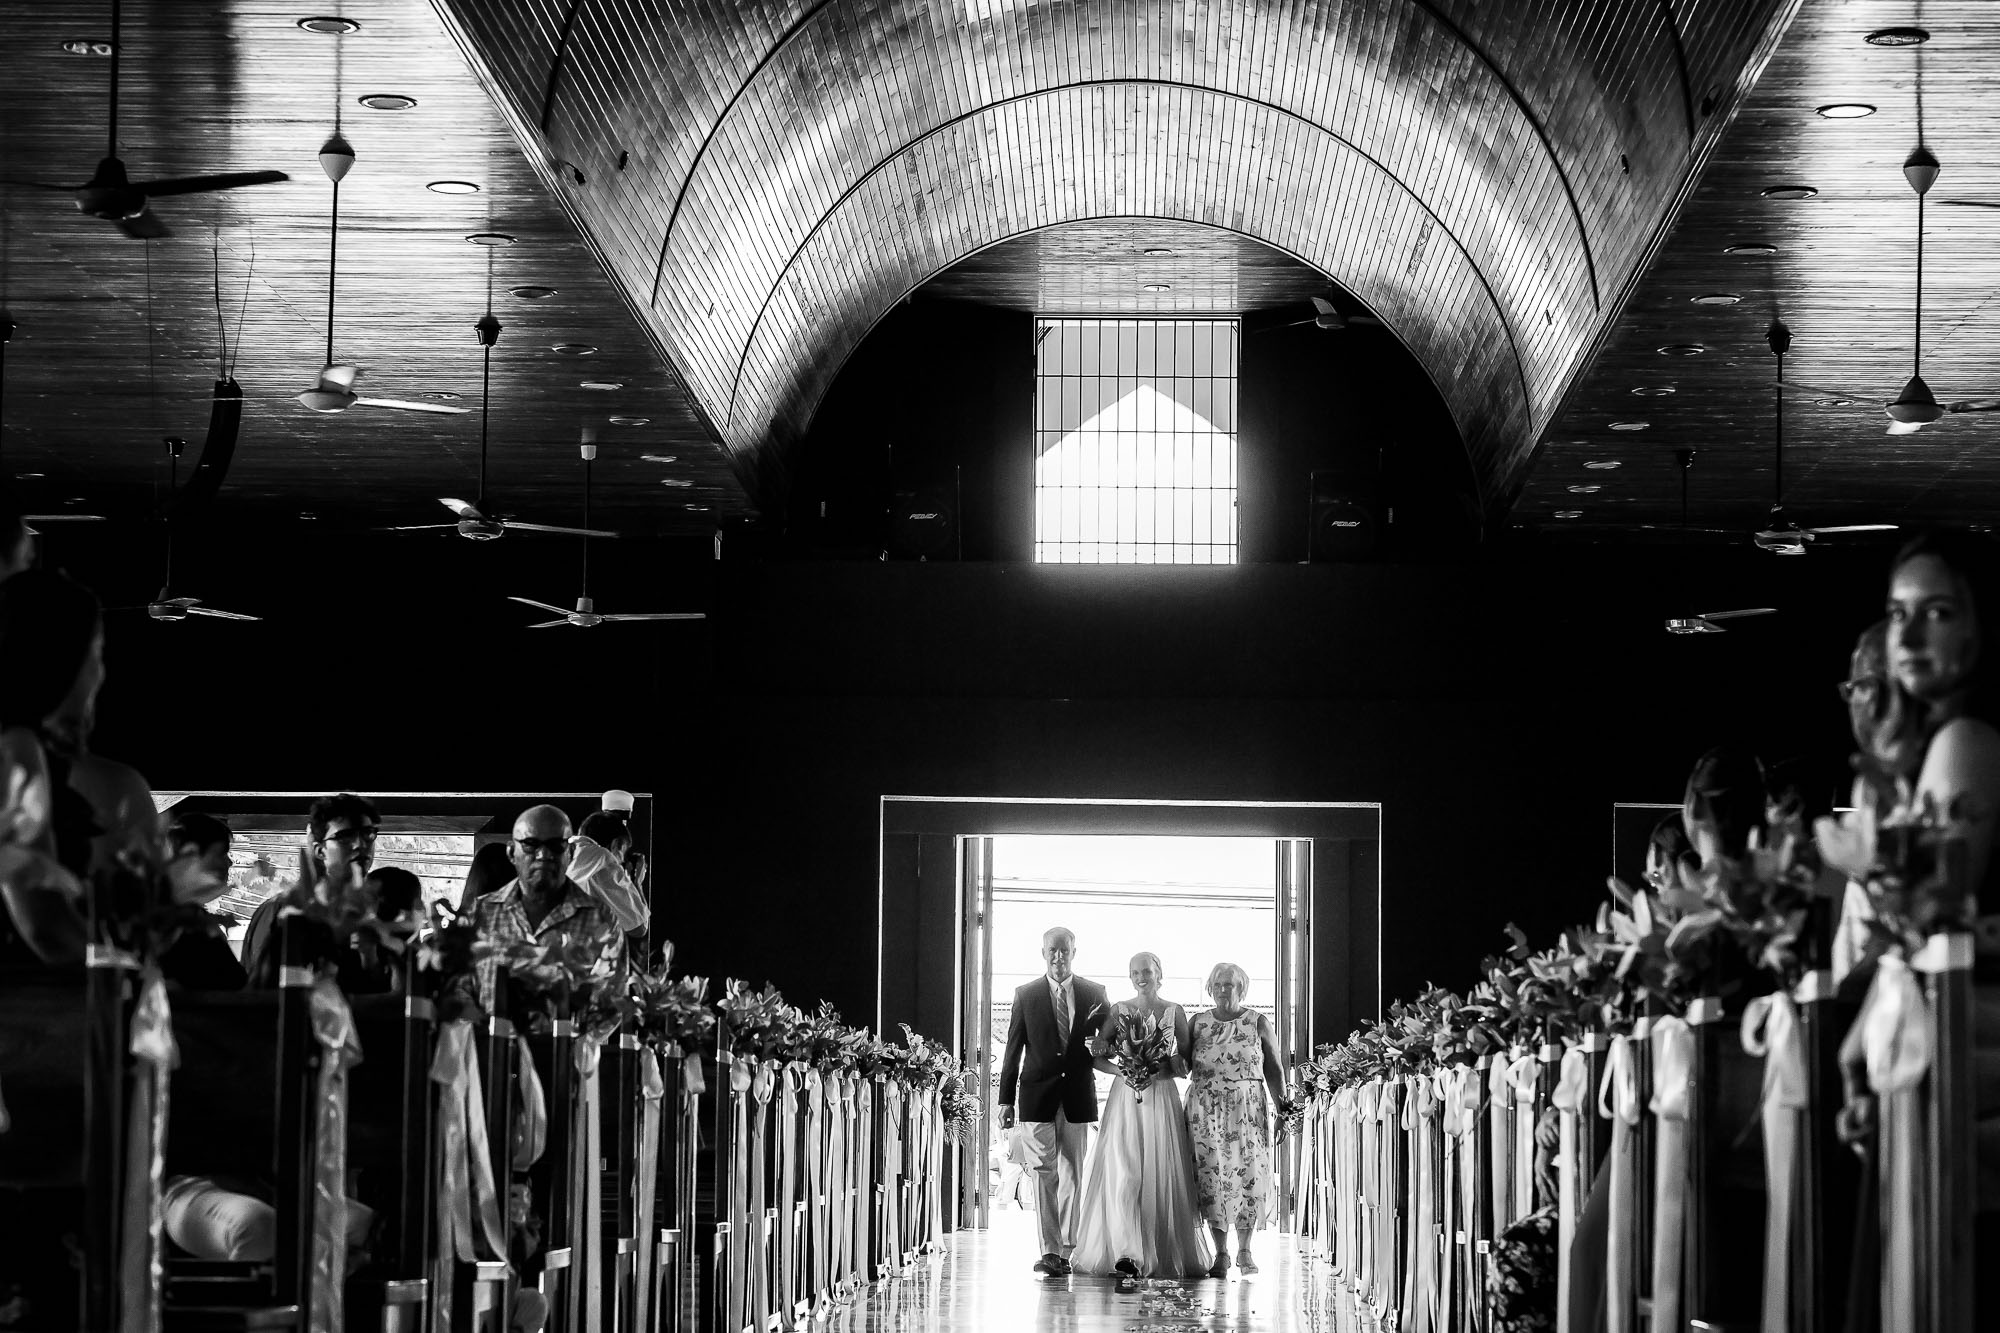 The bride's entrance for her church wedding